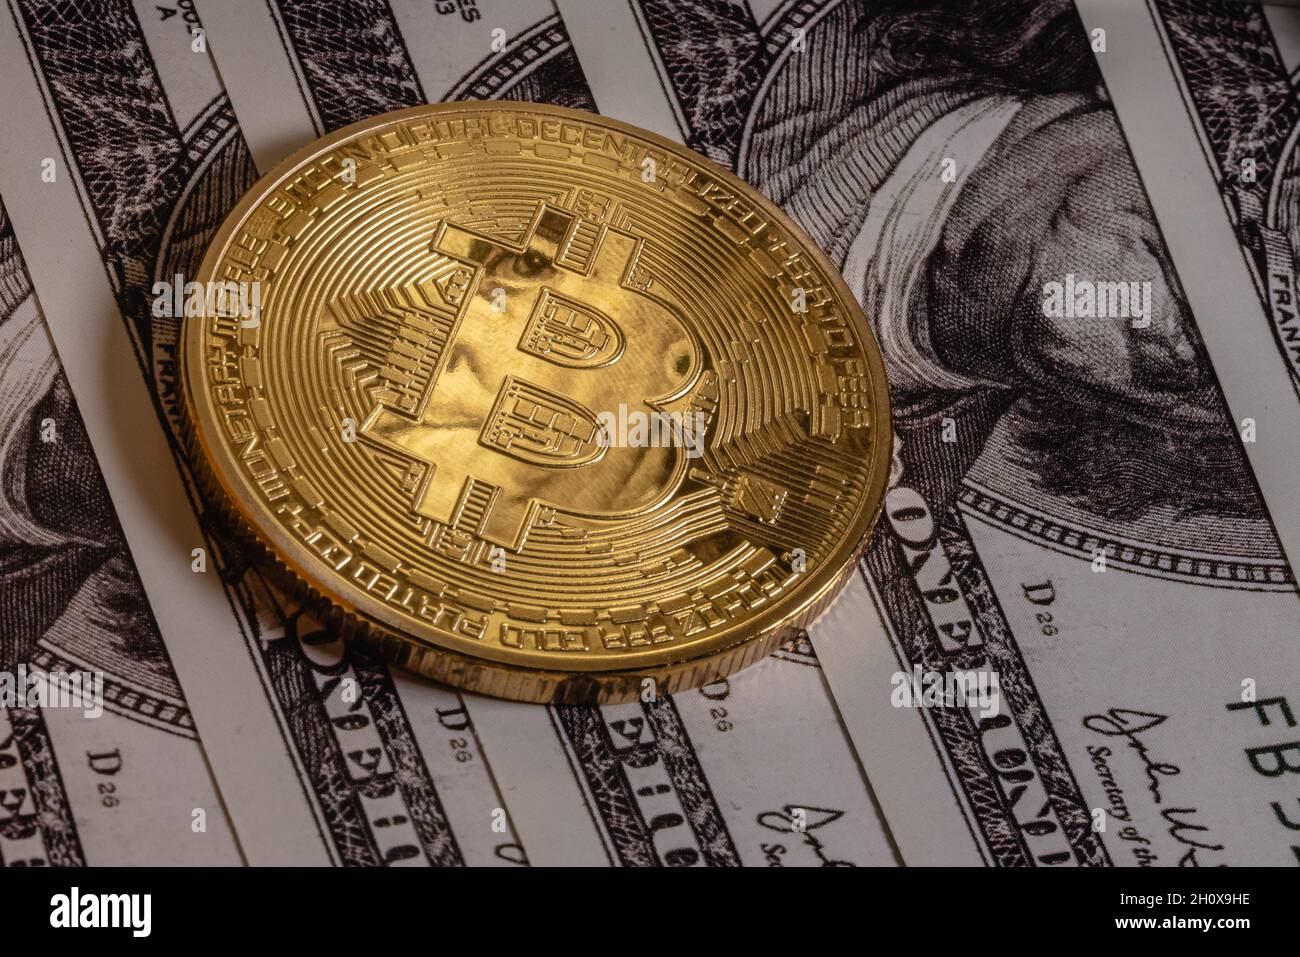 Gold bitcoin on one hundred dollar bills. The coin reflects the eyes of Benjamin Franklin. Stock Photo